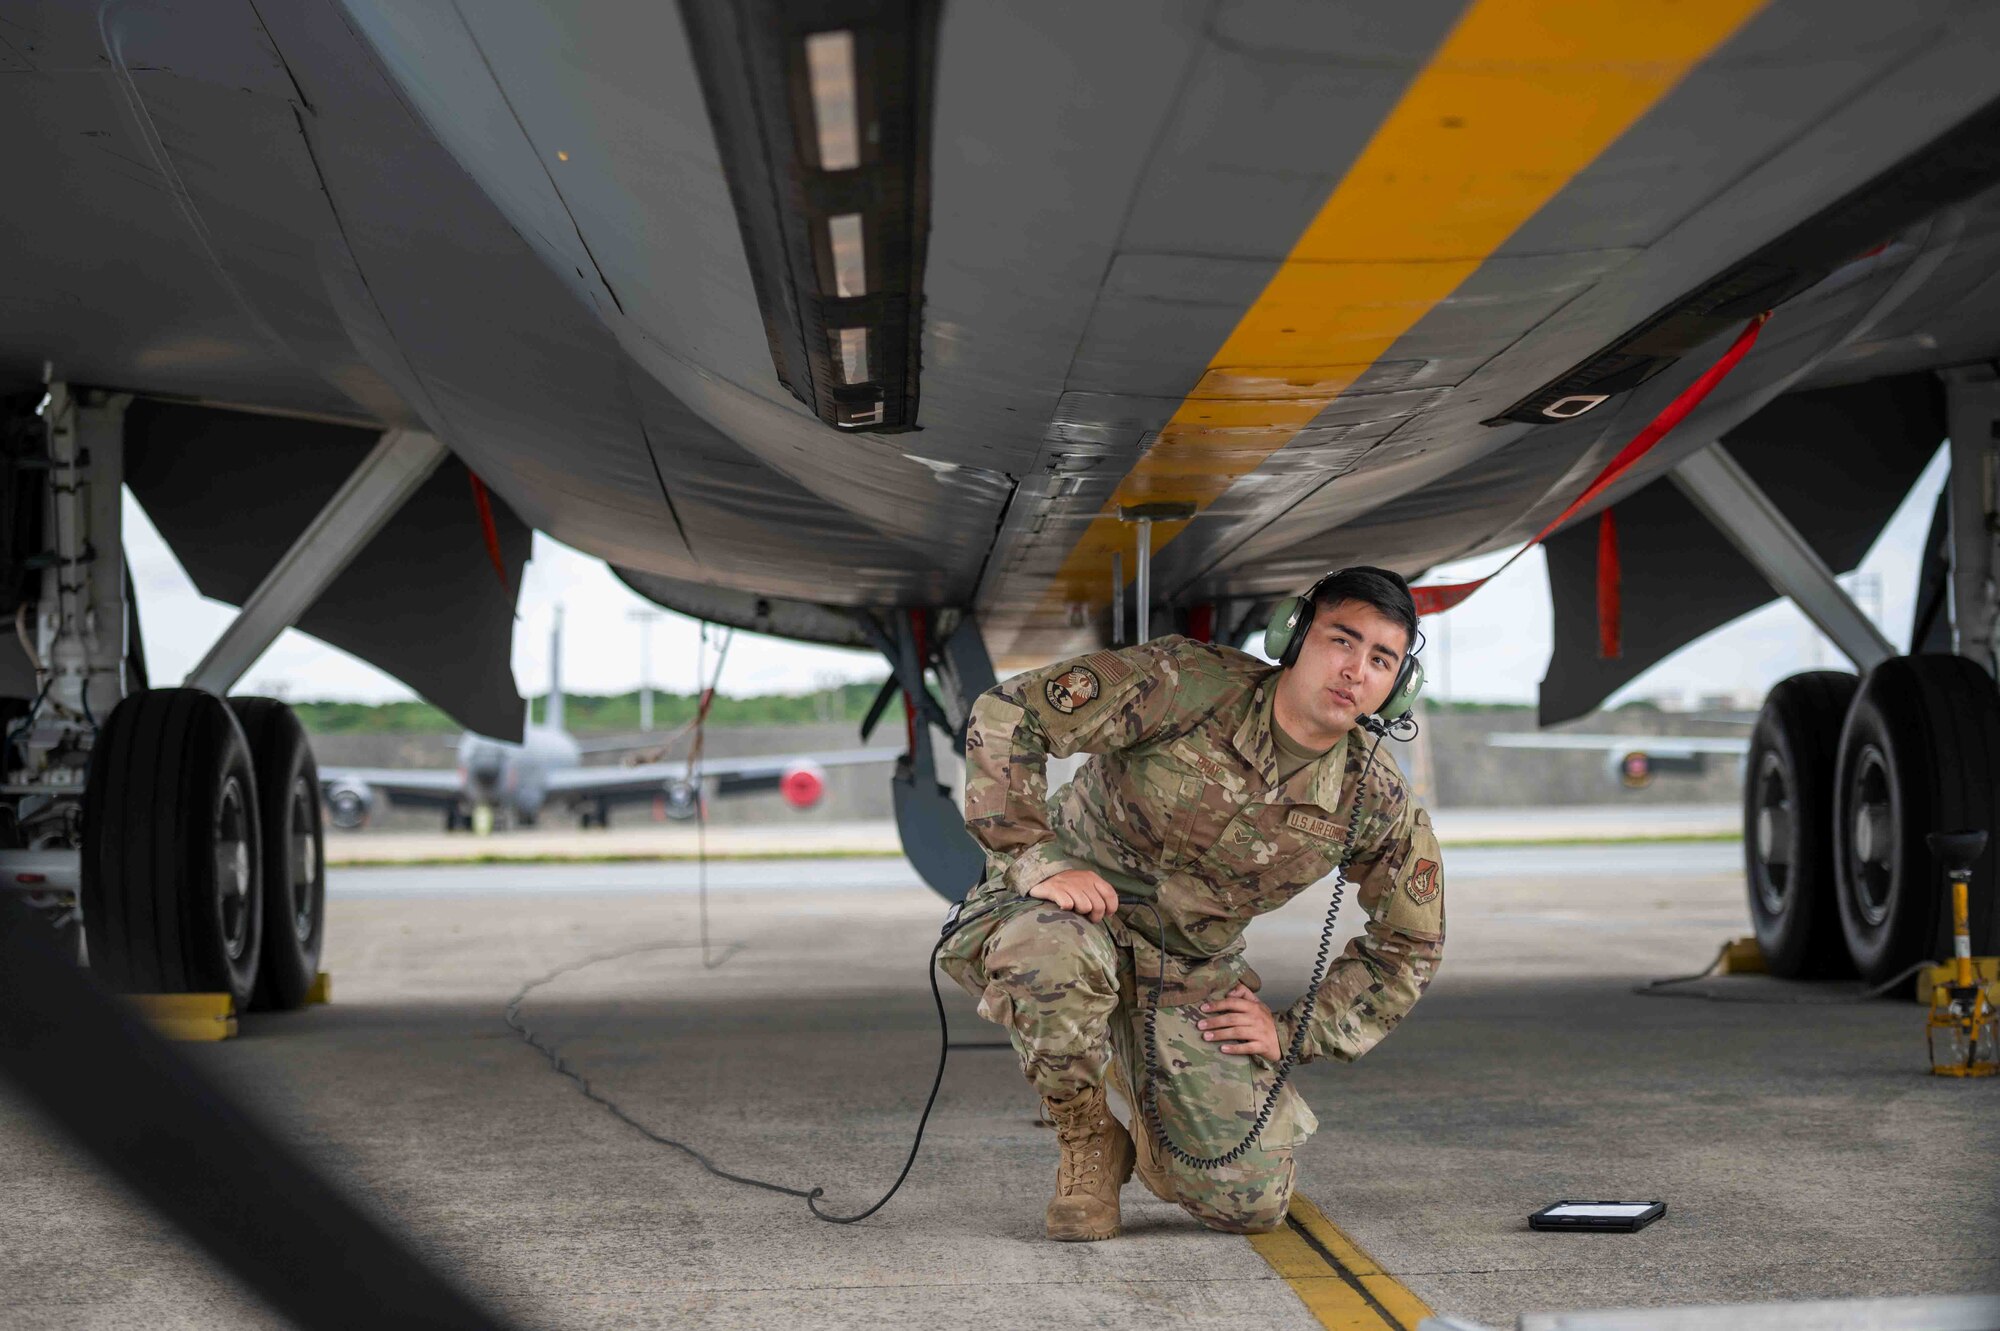 Airman inspects the underneath of an aircraft